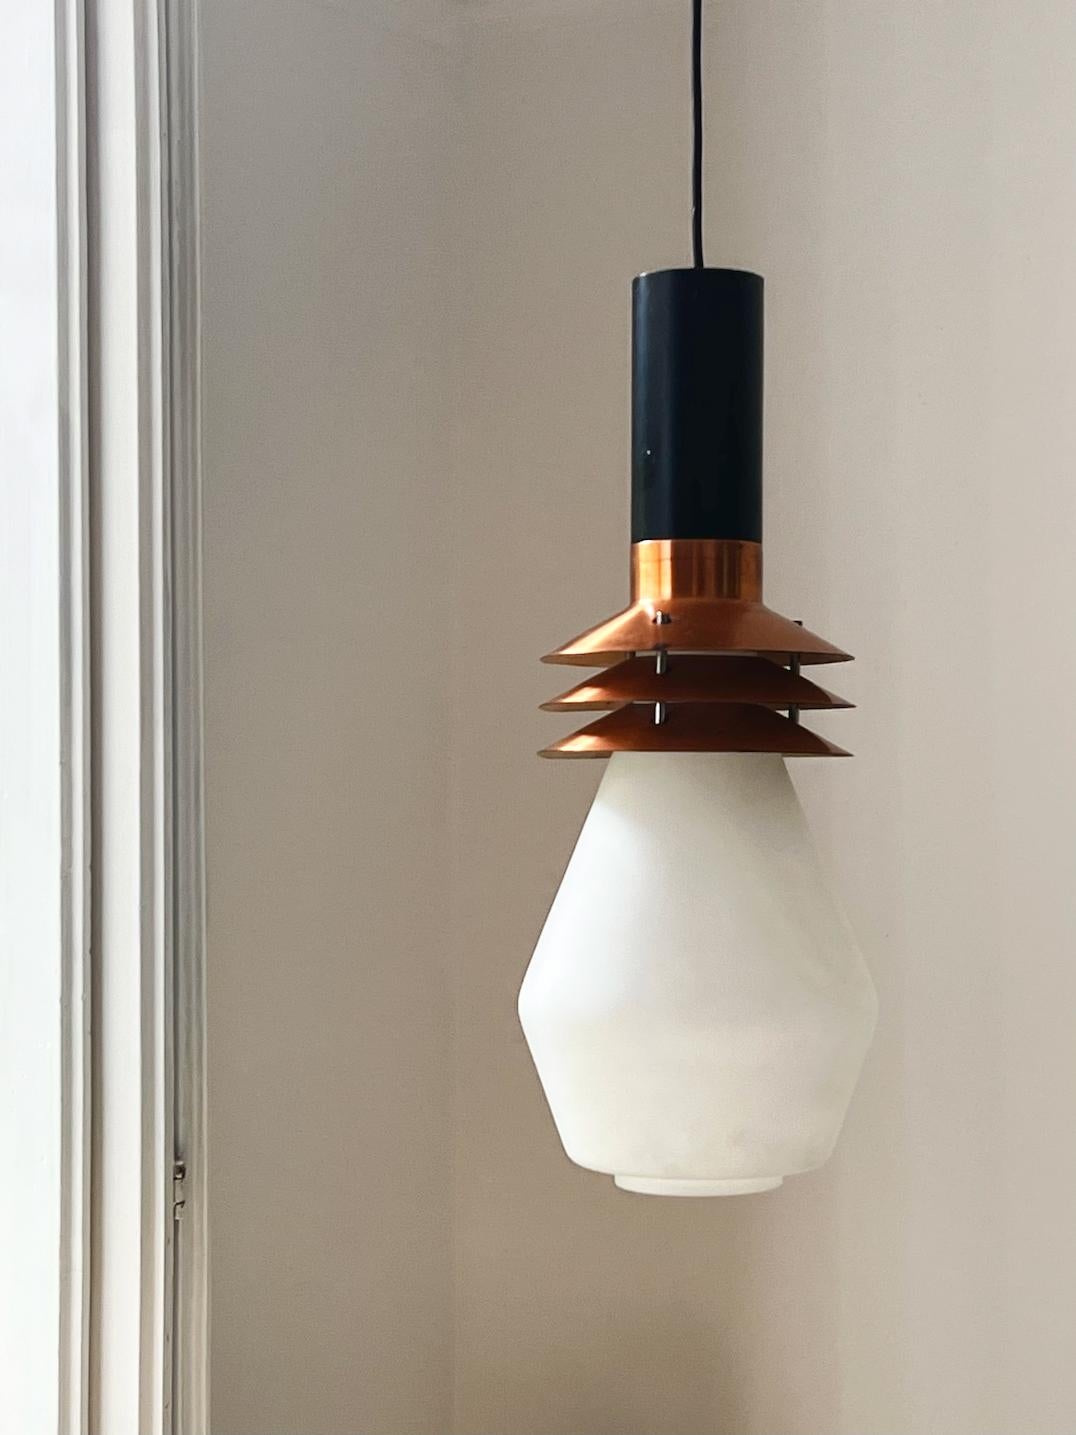 Large pendant light by Stilnovo of Italy. Mid-20th century. Stilnovo label.

The fixture comprises a large white glass shade with an opaque satin finish below a tiered copper diffuser, completed by a black metal tube. The yellow Stilnovo label -